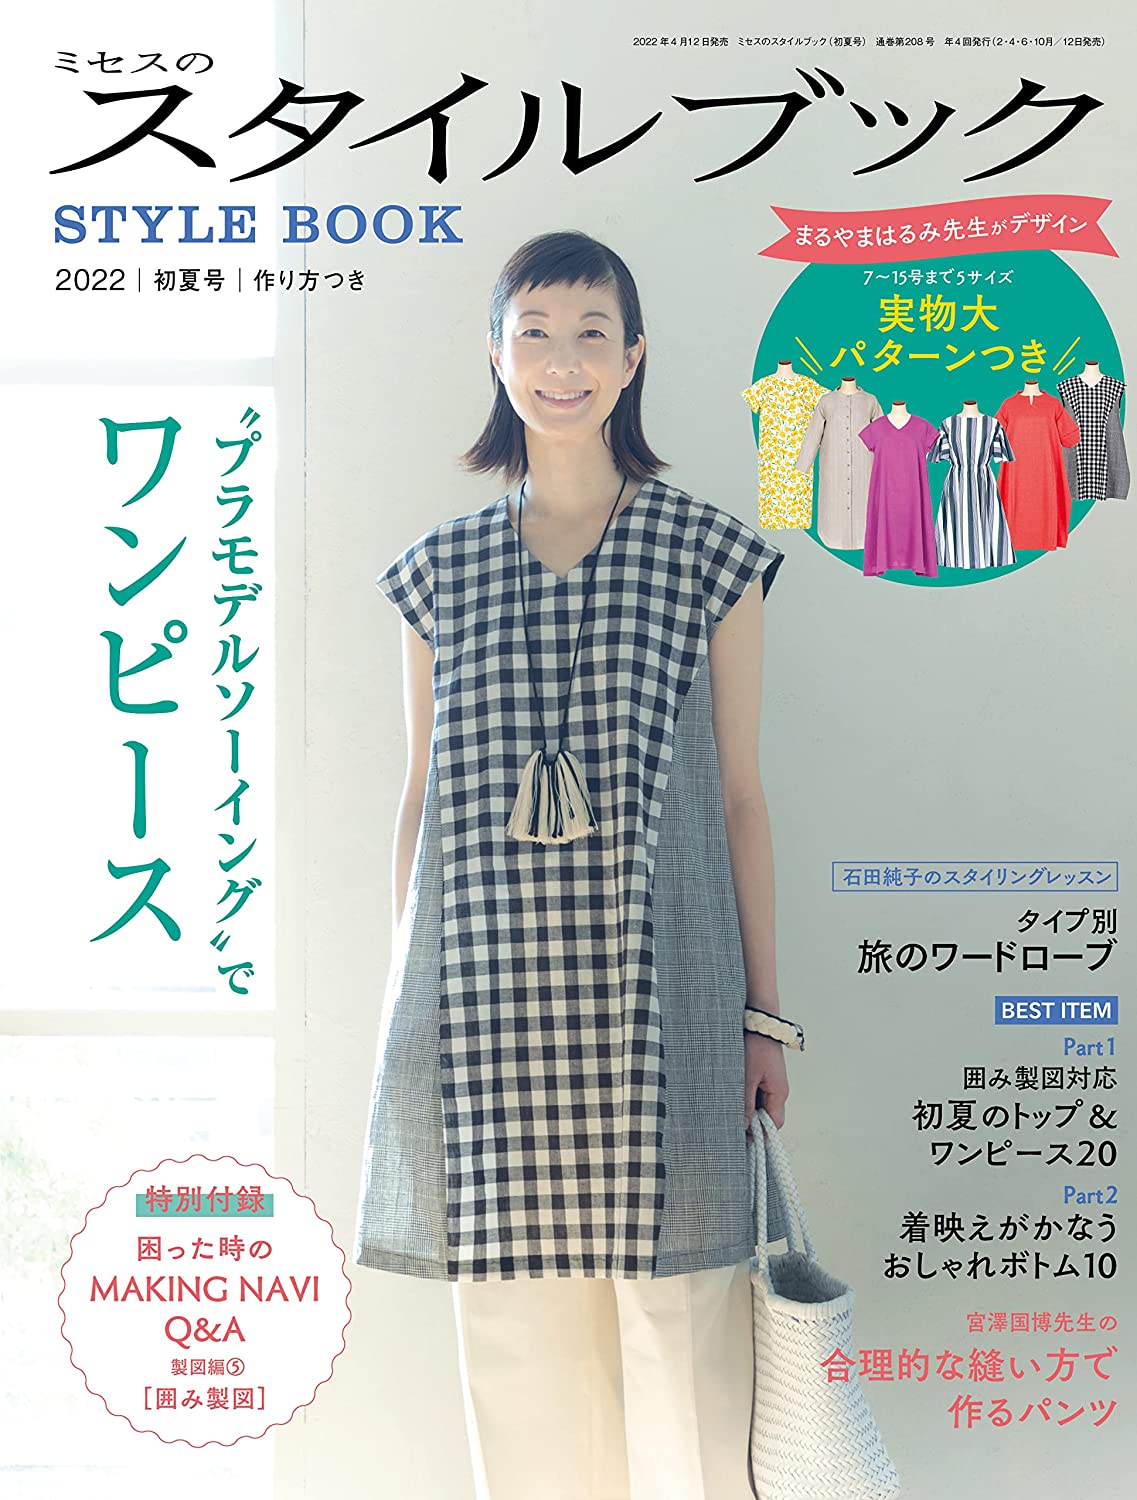 Mrs. Style Book 2022 Early Summer 